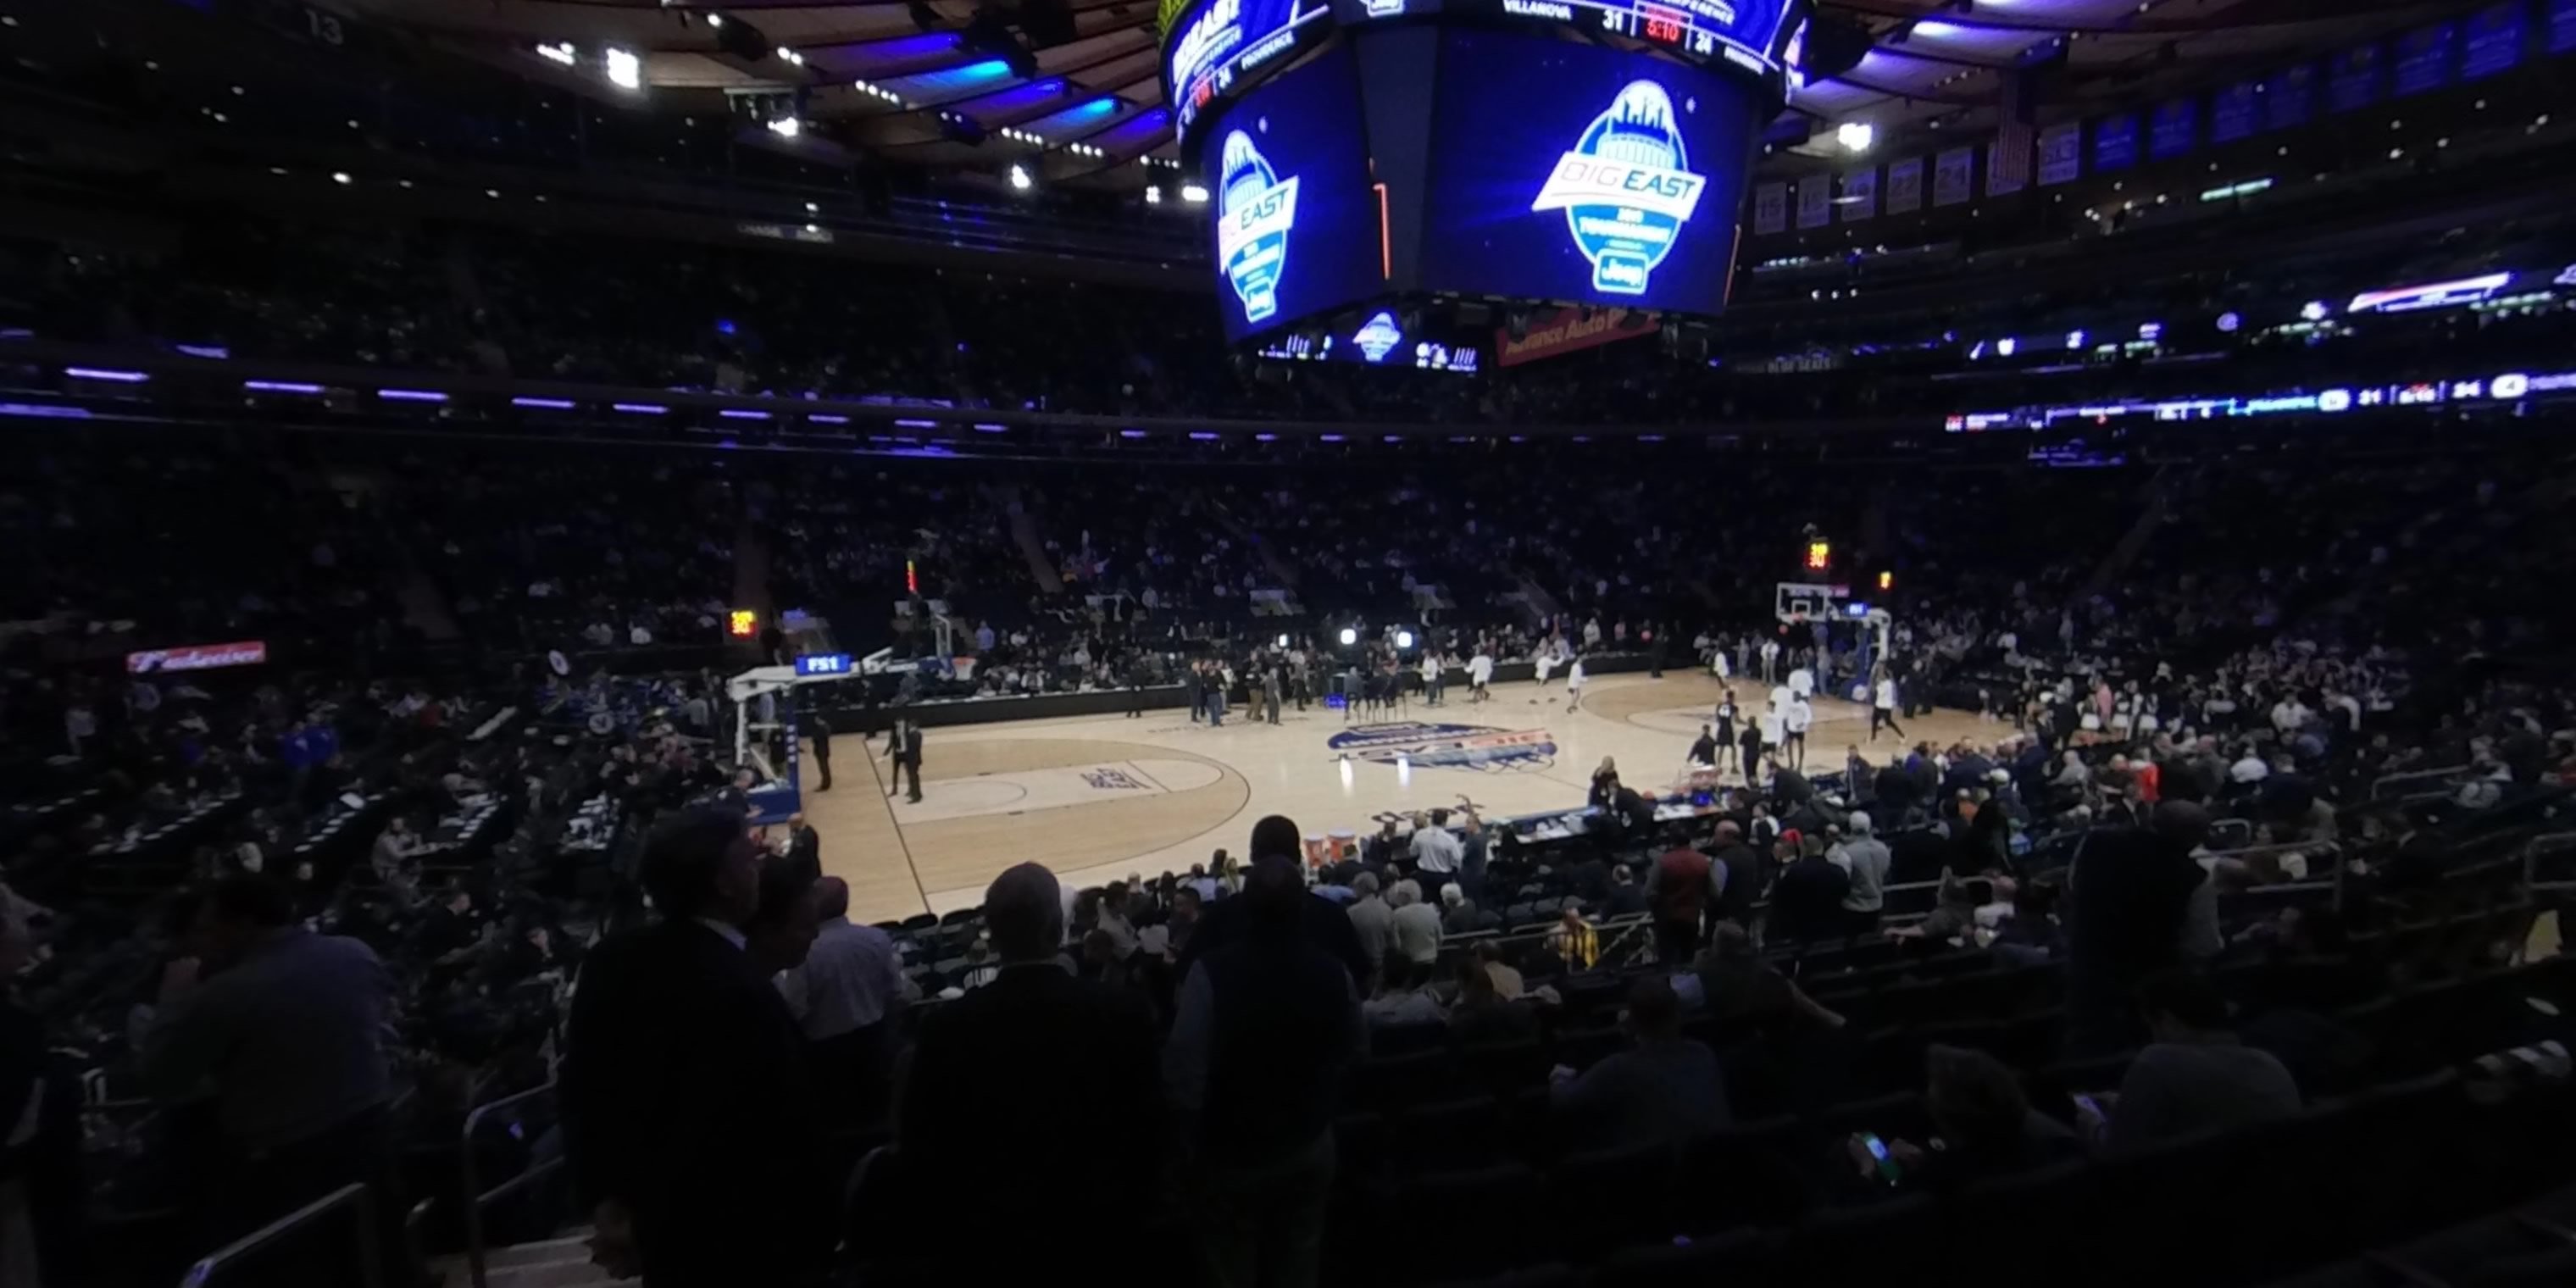 section 105 panoramic seat view  for basketball - madison square garden